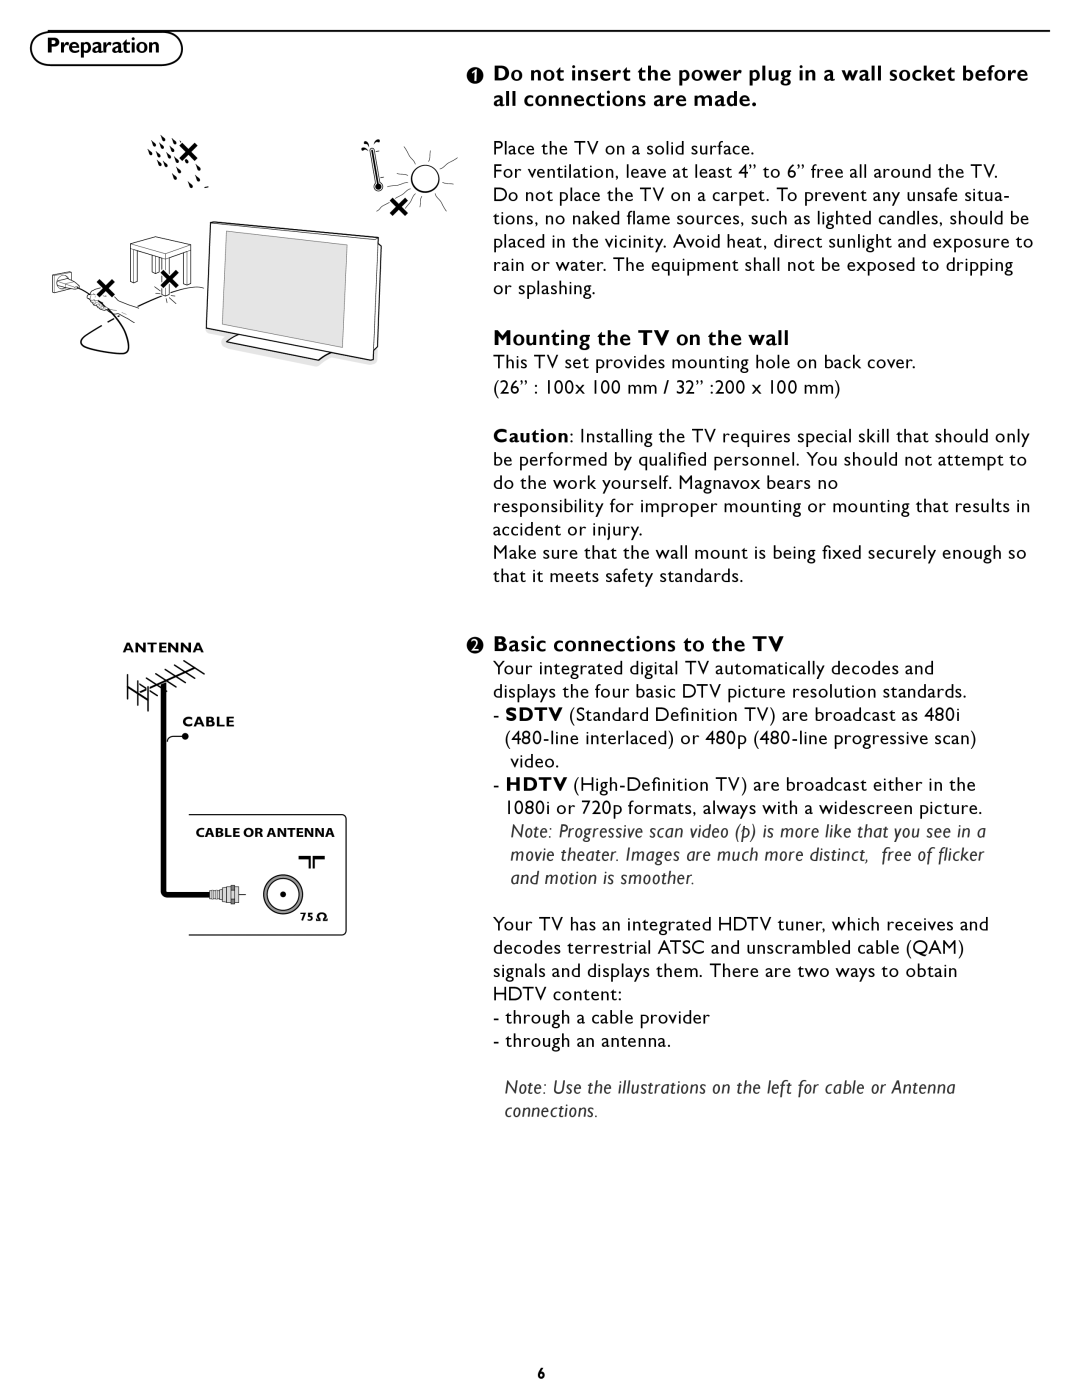 Magnavox 26MF/32MF231D user manual Preparation, Mounting the TV on the wall, Basic connections to the TV 